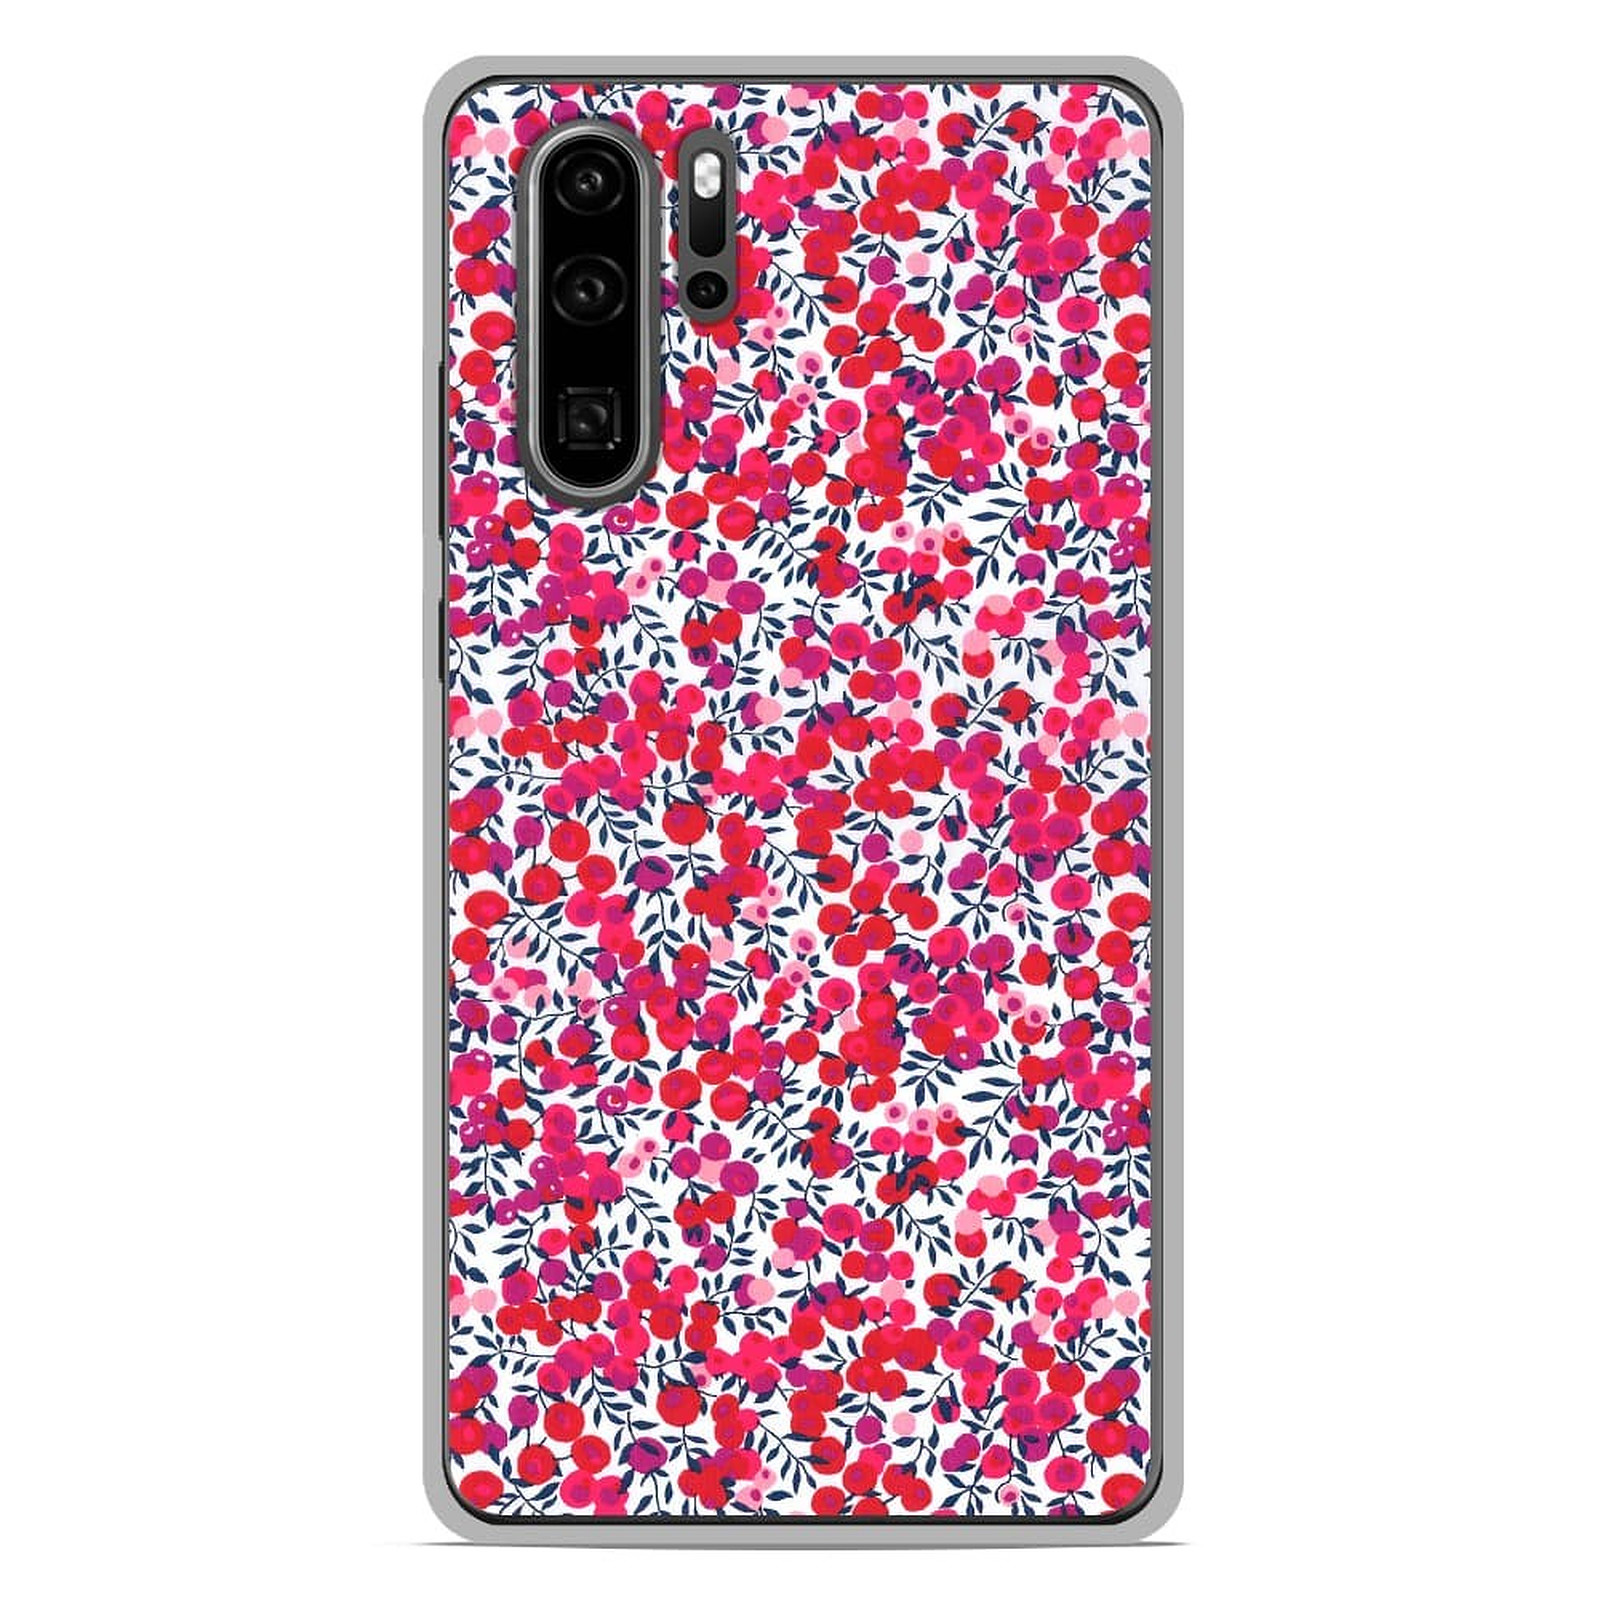 1001 Coques Coque silicone gel Huawei P30 Pro motif Liberty Wiltshire Rouge - Coque telephone 1001Coques